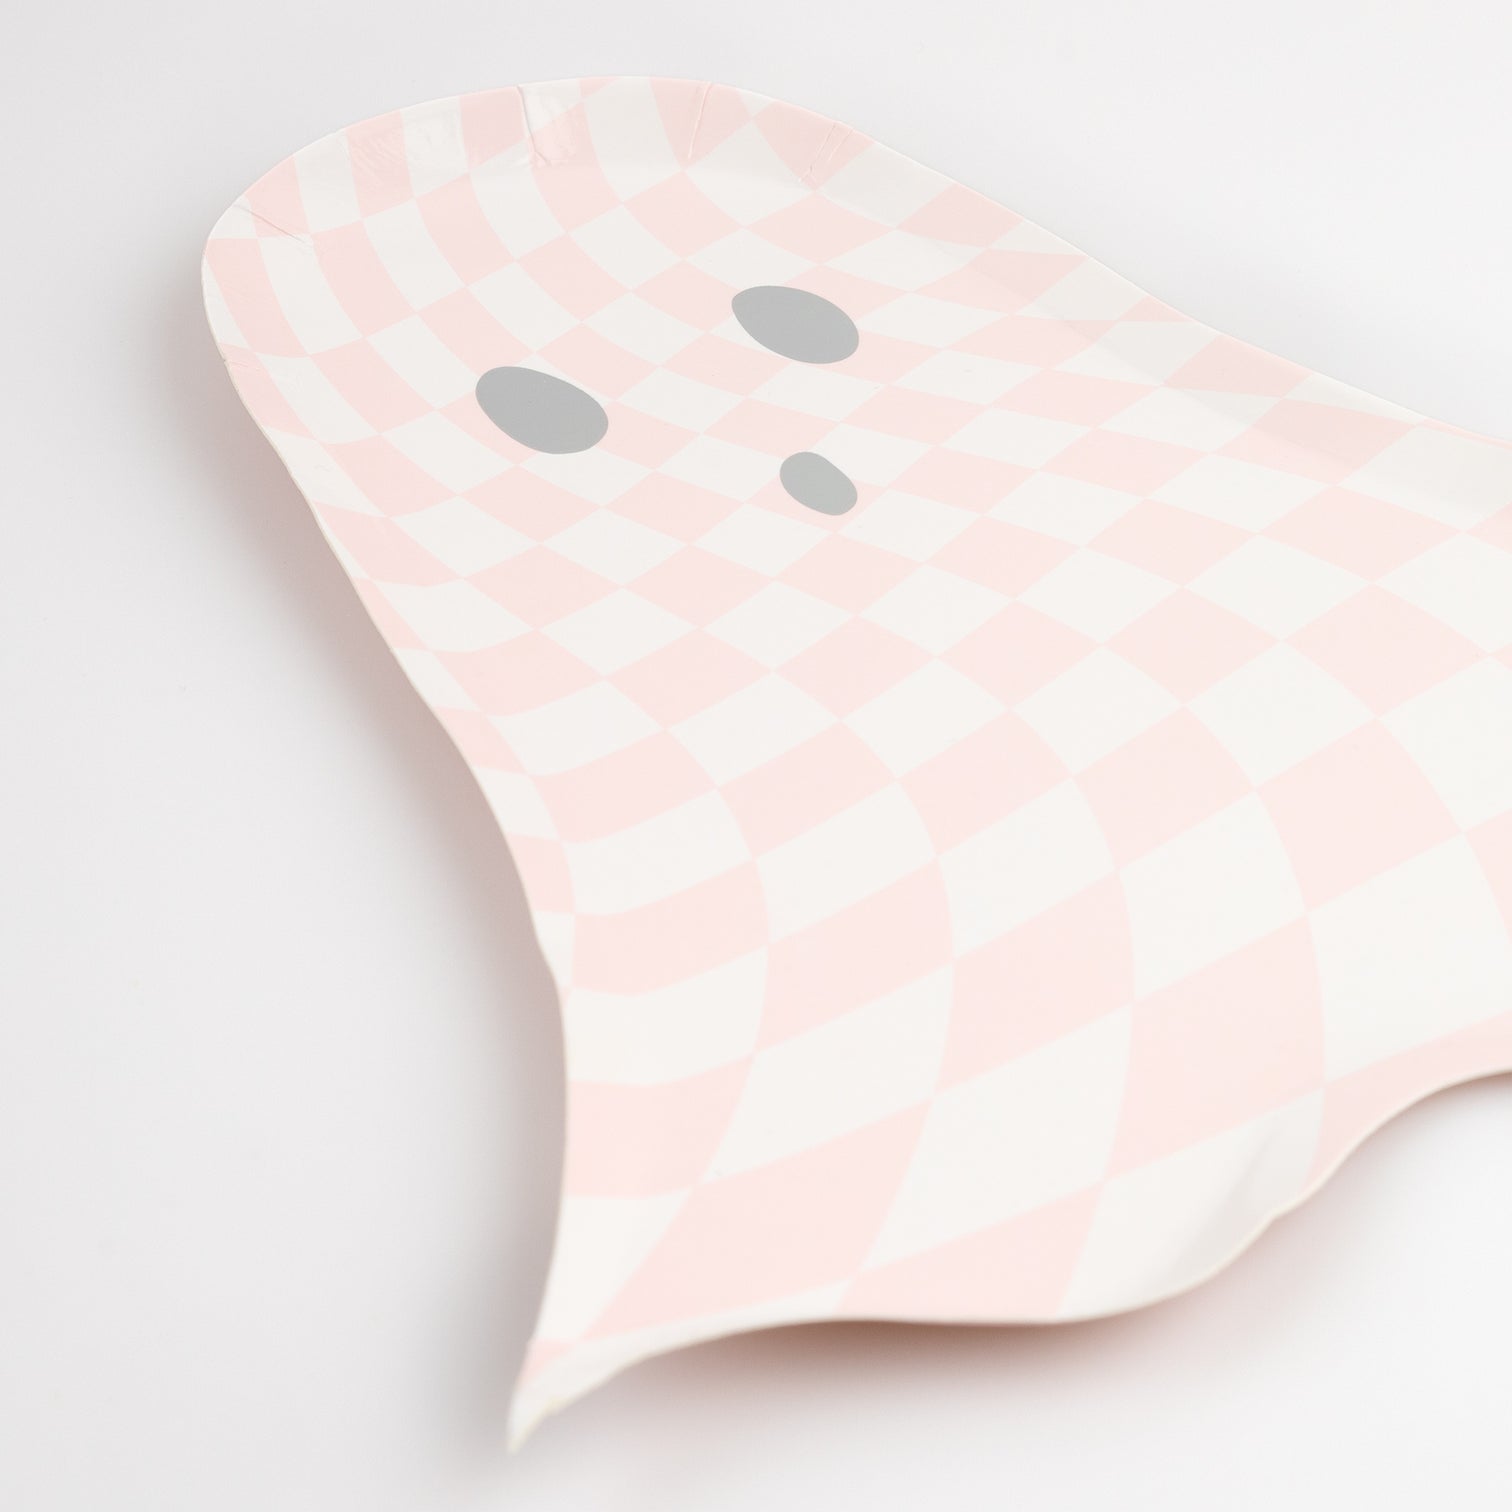 Details of Meri Meri 10.125 x 9.25 inches pink checkered ghost shaped plates, sold by Momo Party. Comes in a set of 8 plates, these pink ghost shaped plates with checkered pattern are chic and stylish, perfect for a pink Halloween themed party.